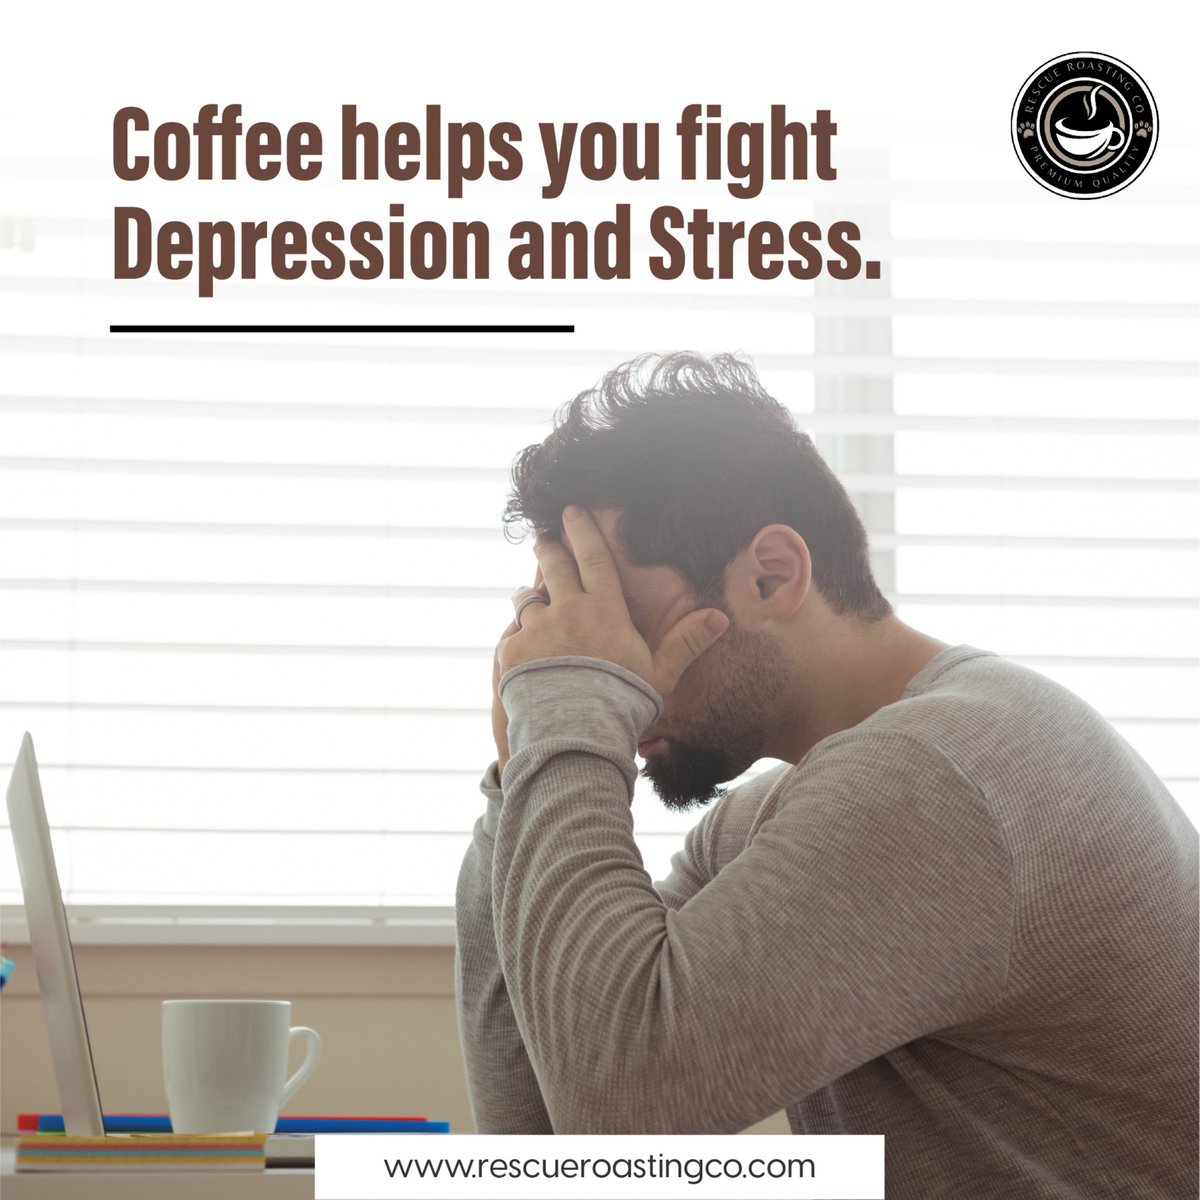 A single cup of coffee can help you retain back the energy your mind requires. Studies have shown that coffee can improve mood and help in reducing the risk of depression and stress. 

So why not treat yourself to a warm cup of coffee and let it work its magic? 

#caffeineboost